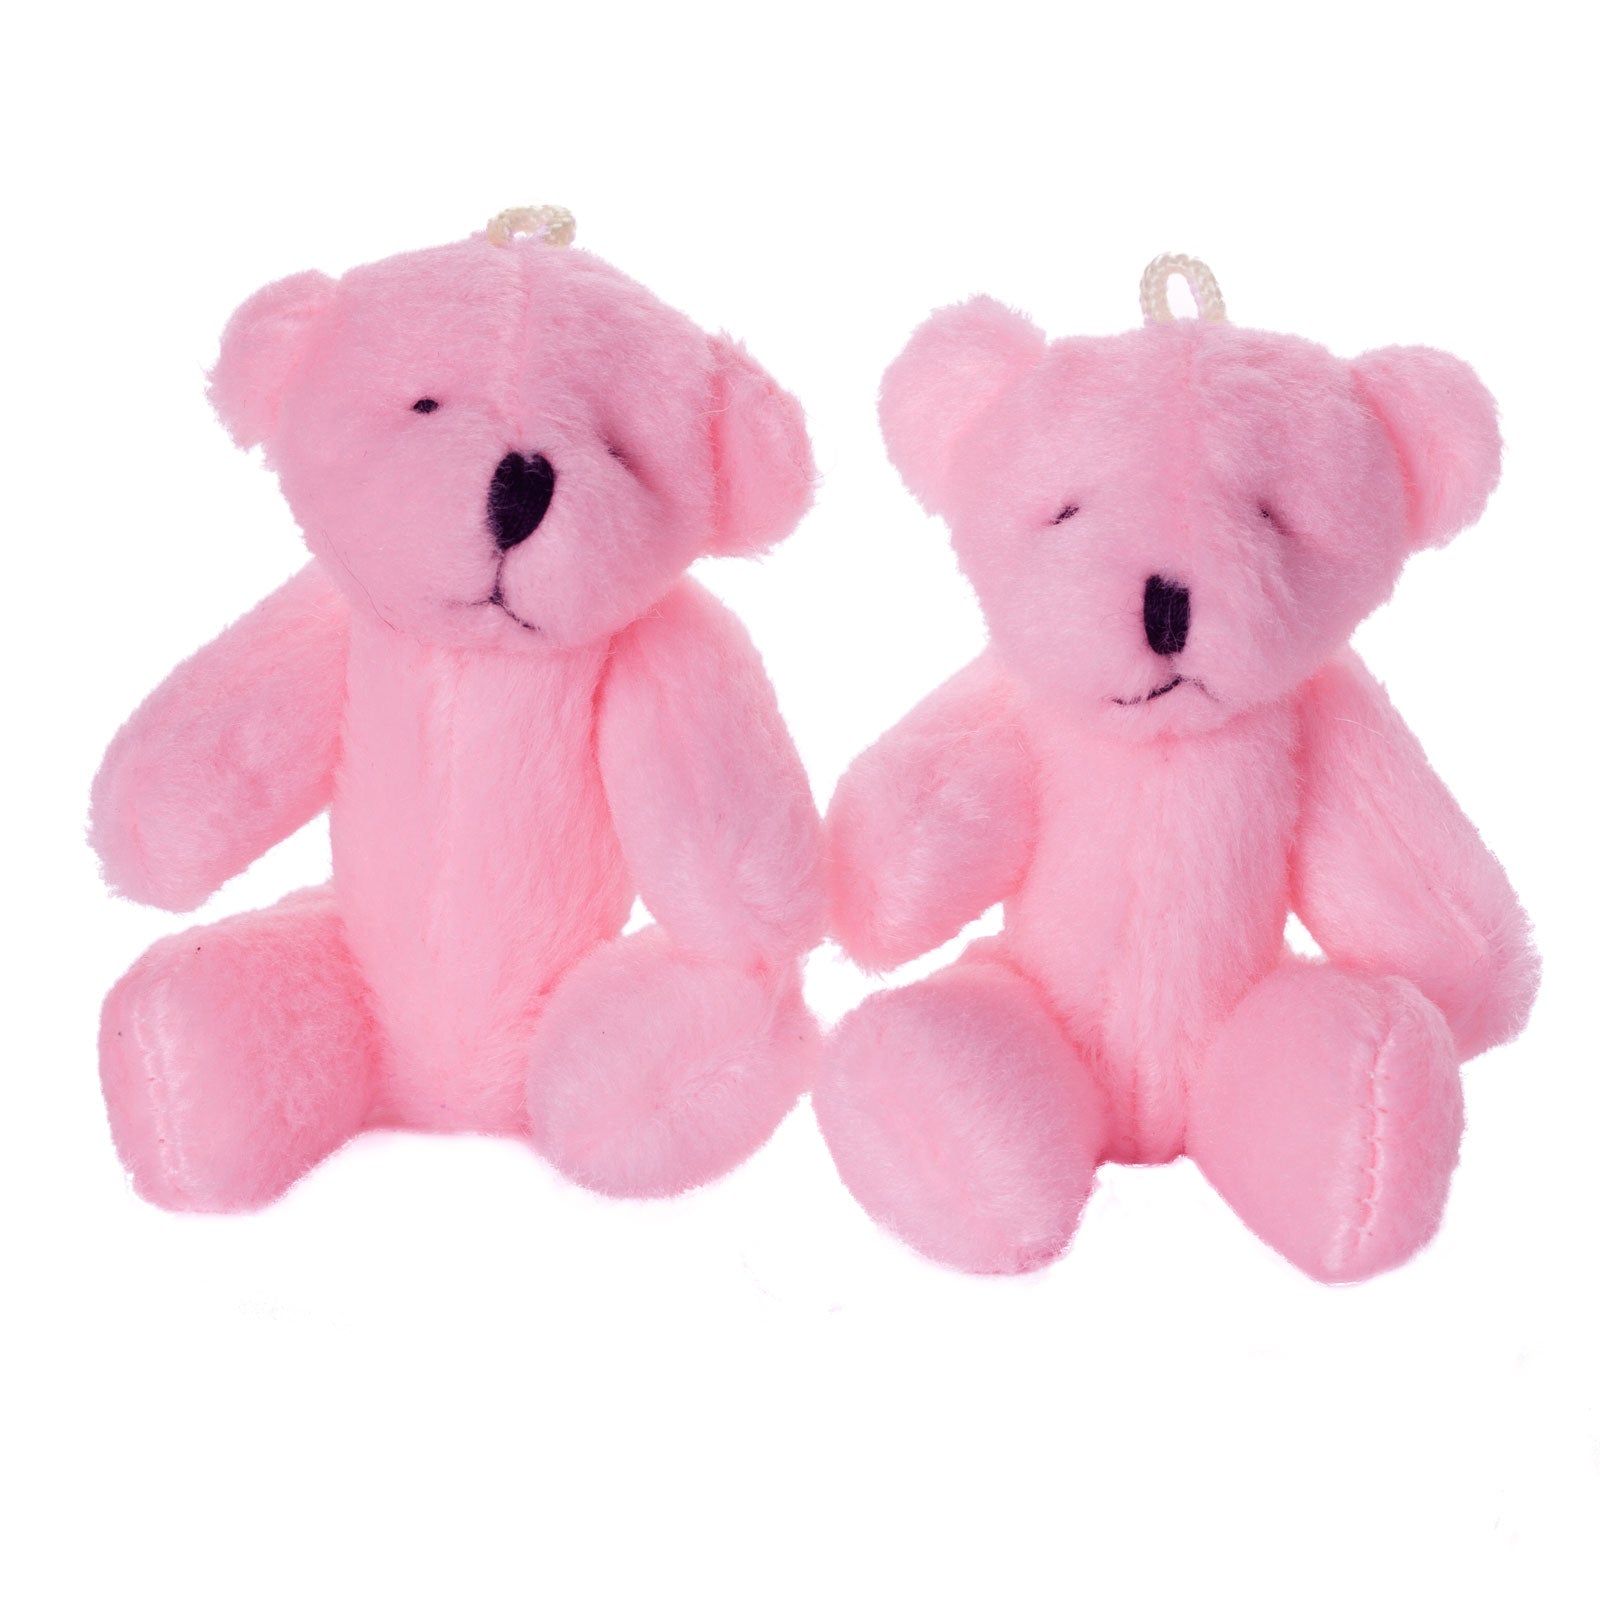 Small PINK Teddy Bears X 60 - Cute Soft Adorable